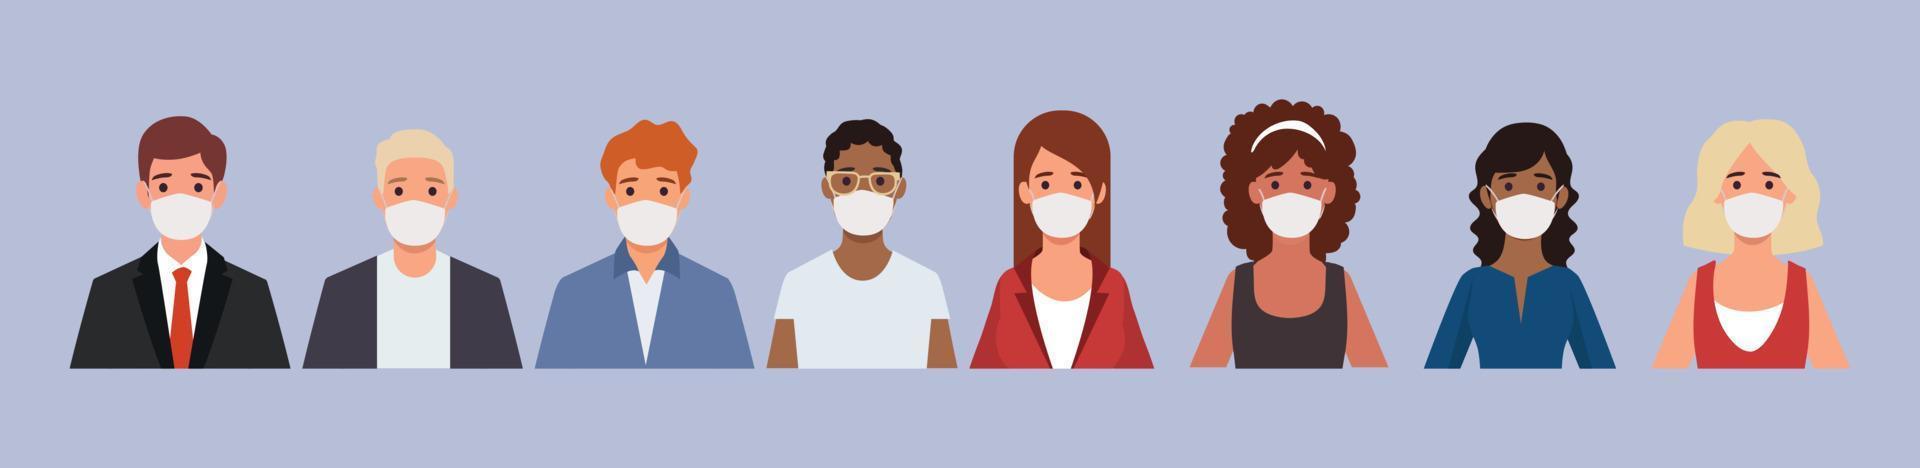 Group of people wearing medical masks to prevent disease, flu, air pollution, contaminated air, world pollution. Corona virus.Vector illustration in a flat style vector